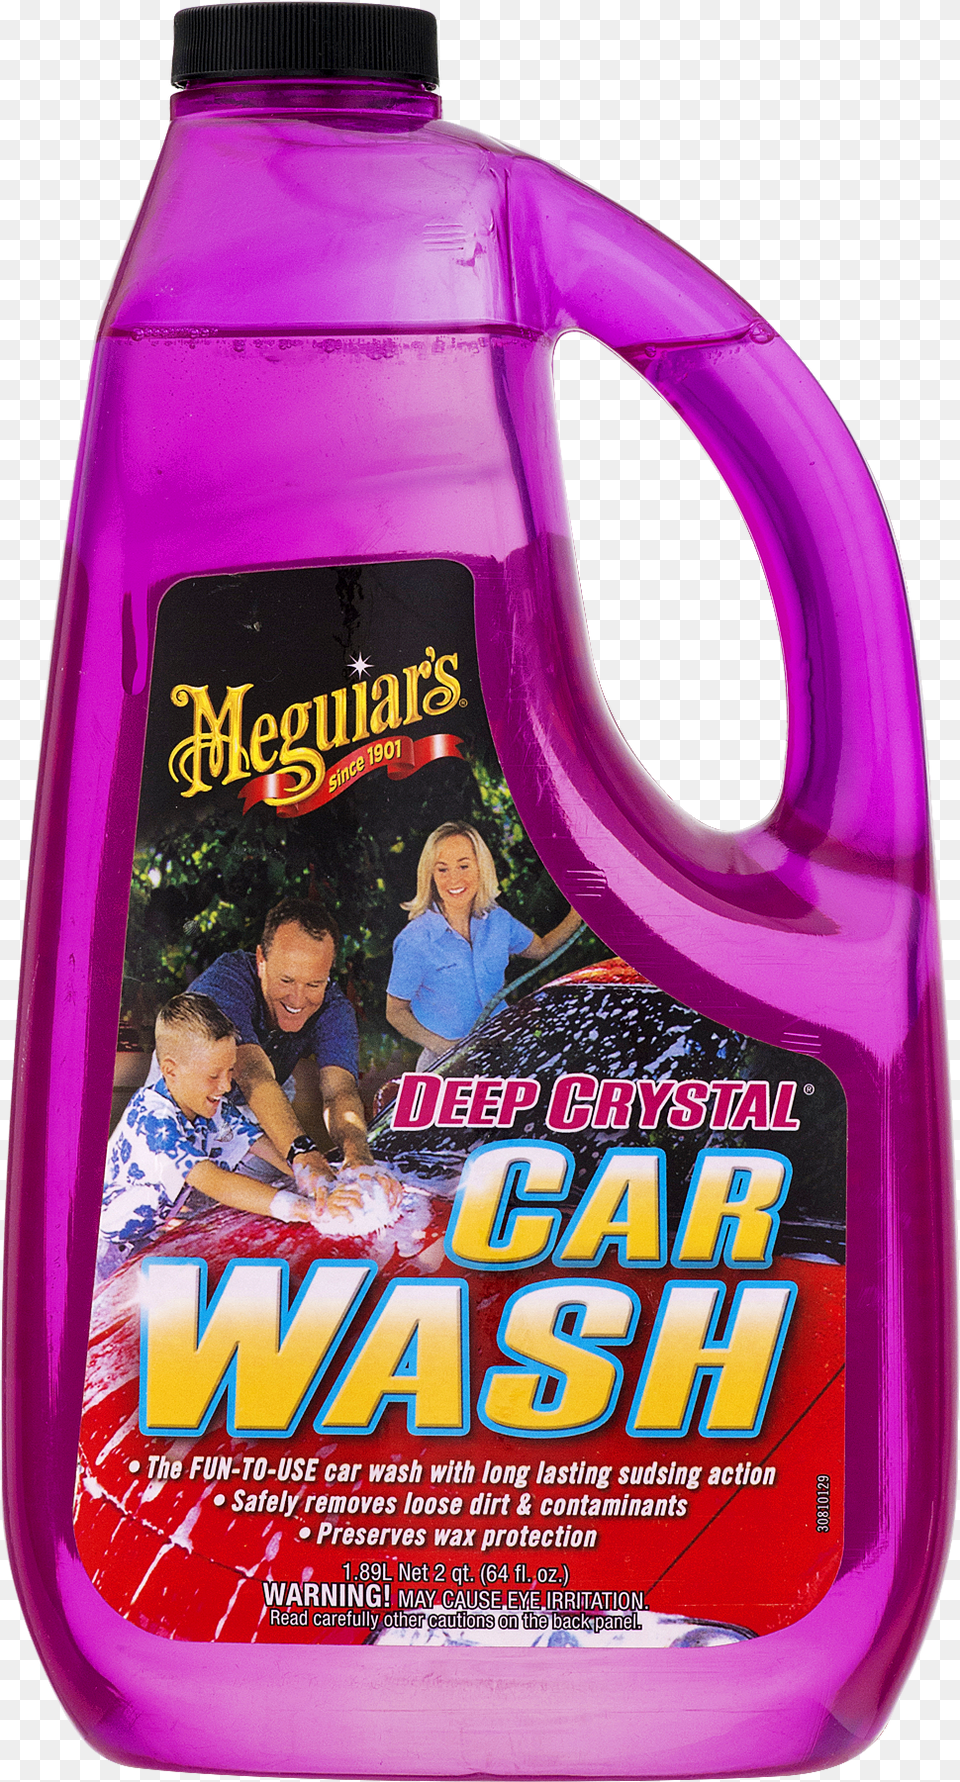 Meguiars Deep Crystal Car Wash, Adult, Person, Woman, Female Png Image